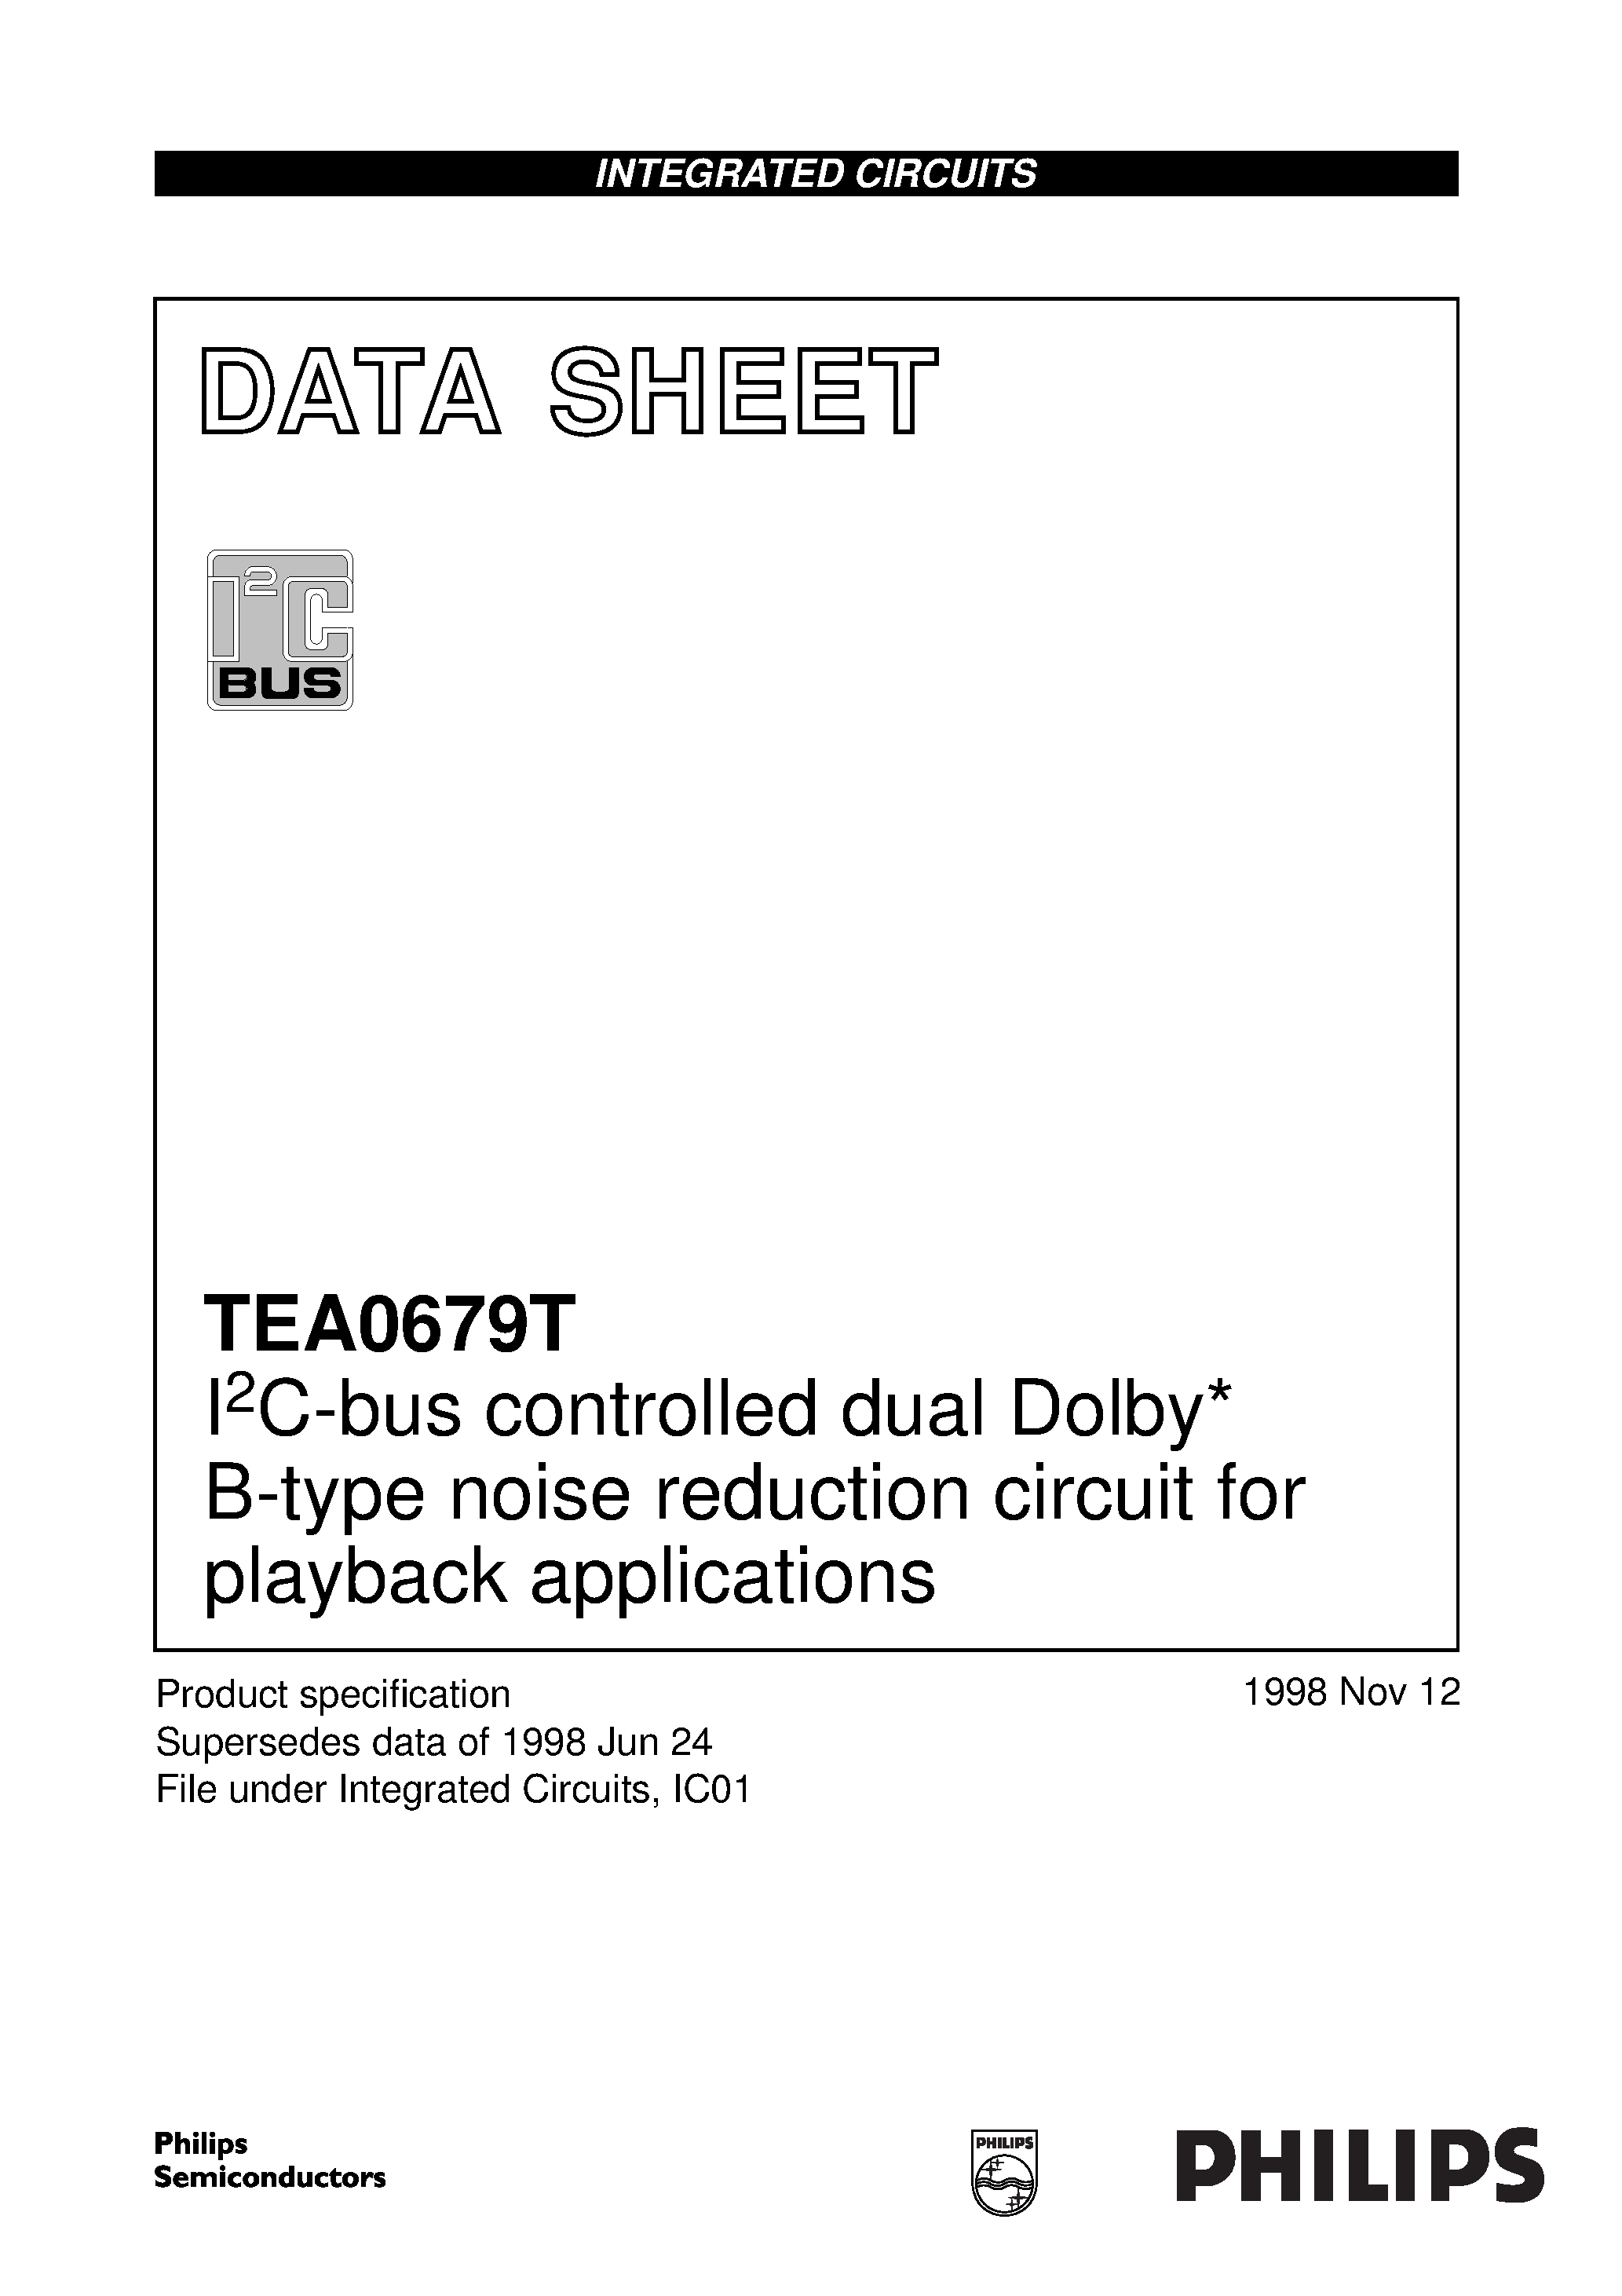 Datasheet TEA0679 - I2C-bus controlled dual Dolby* B-type noise reduction circuit for playback applications page 1